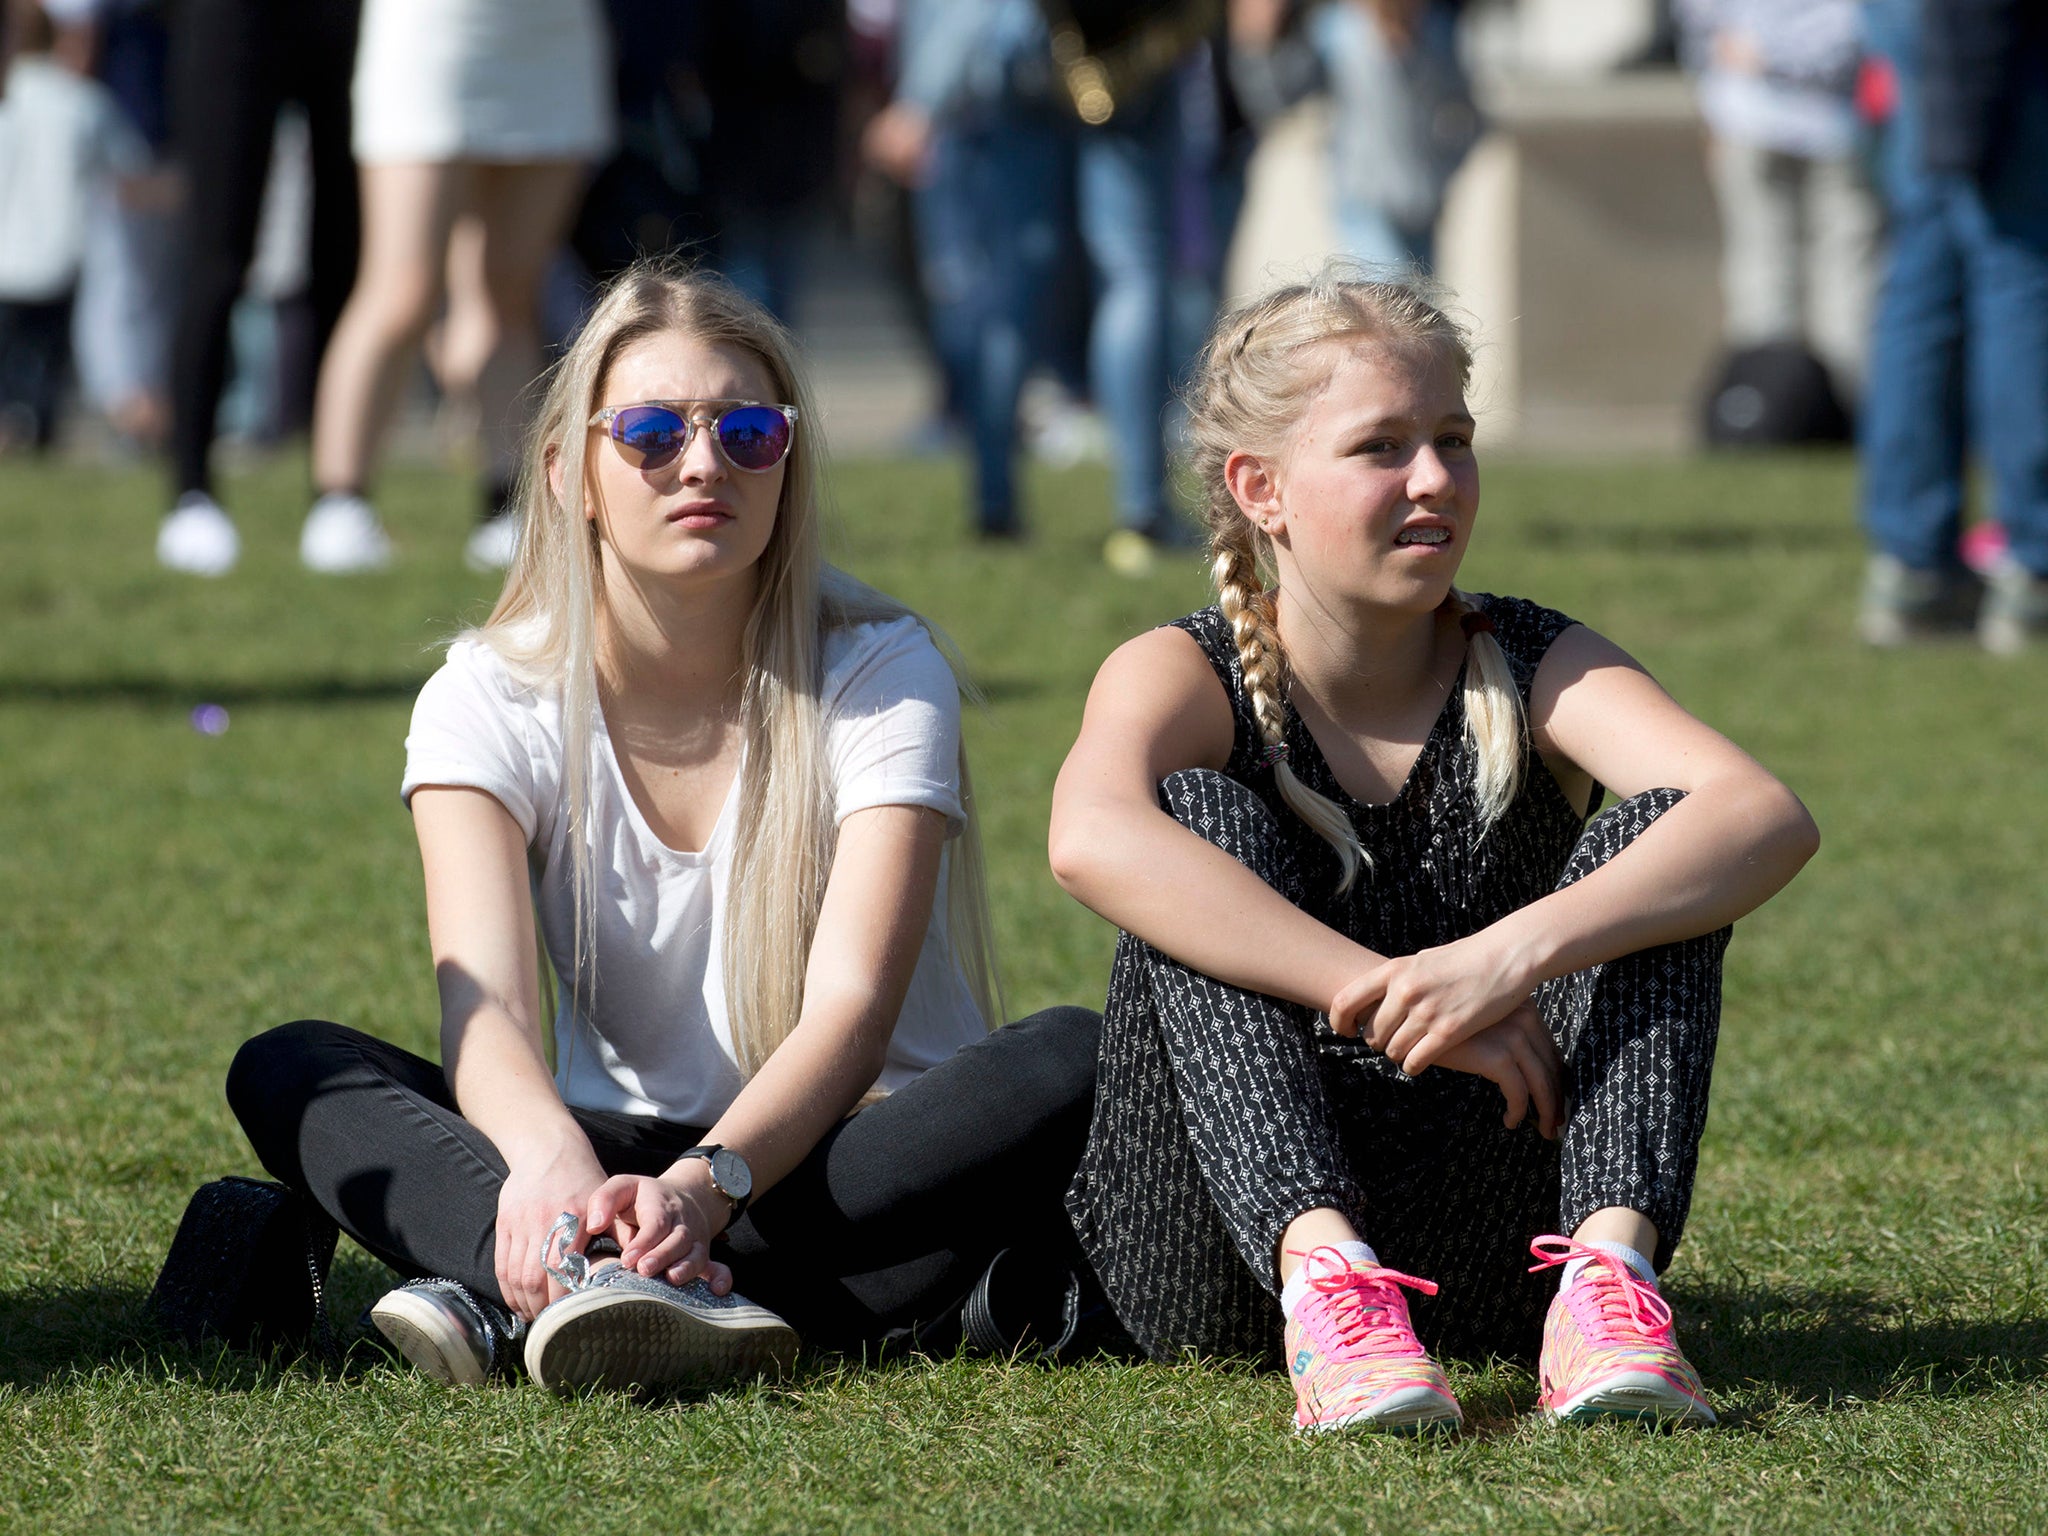 People enjoyed the sunshine at Parliament Square in central London on Sunday